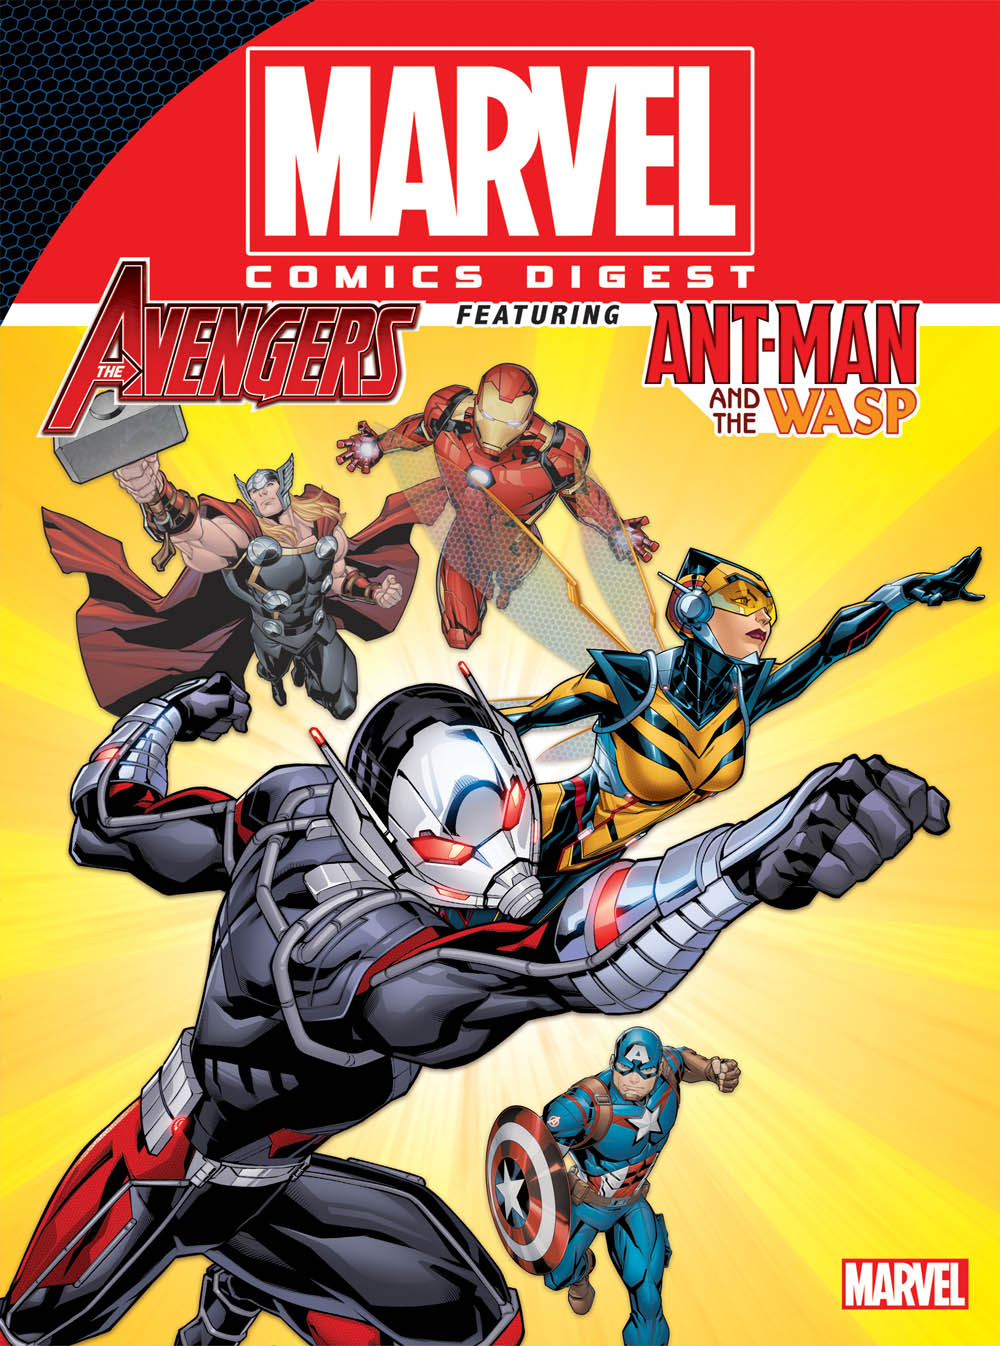 PREVIEW: Ant-Man and the Wasp Take Center Stage in Marvel Comics Digest #7